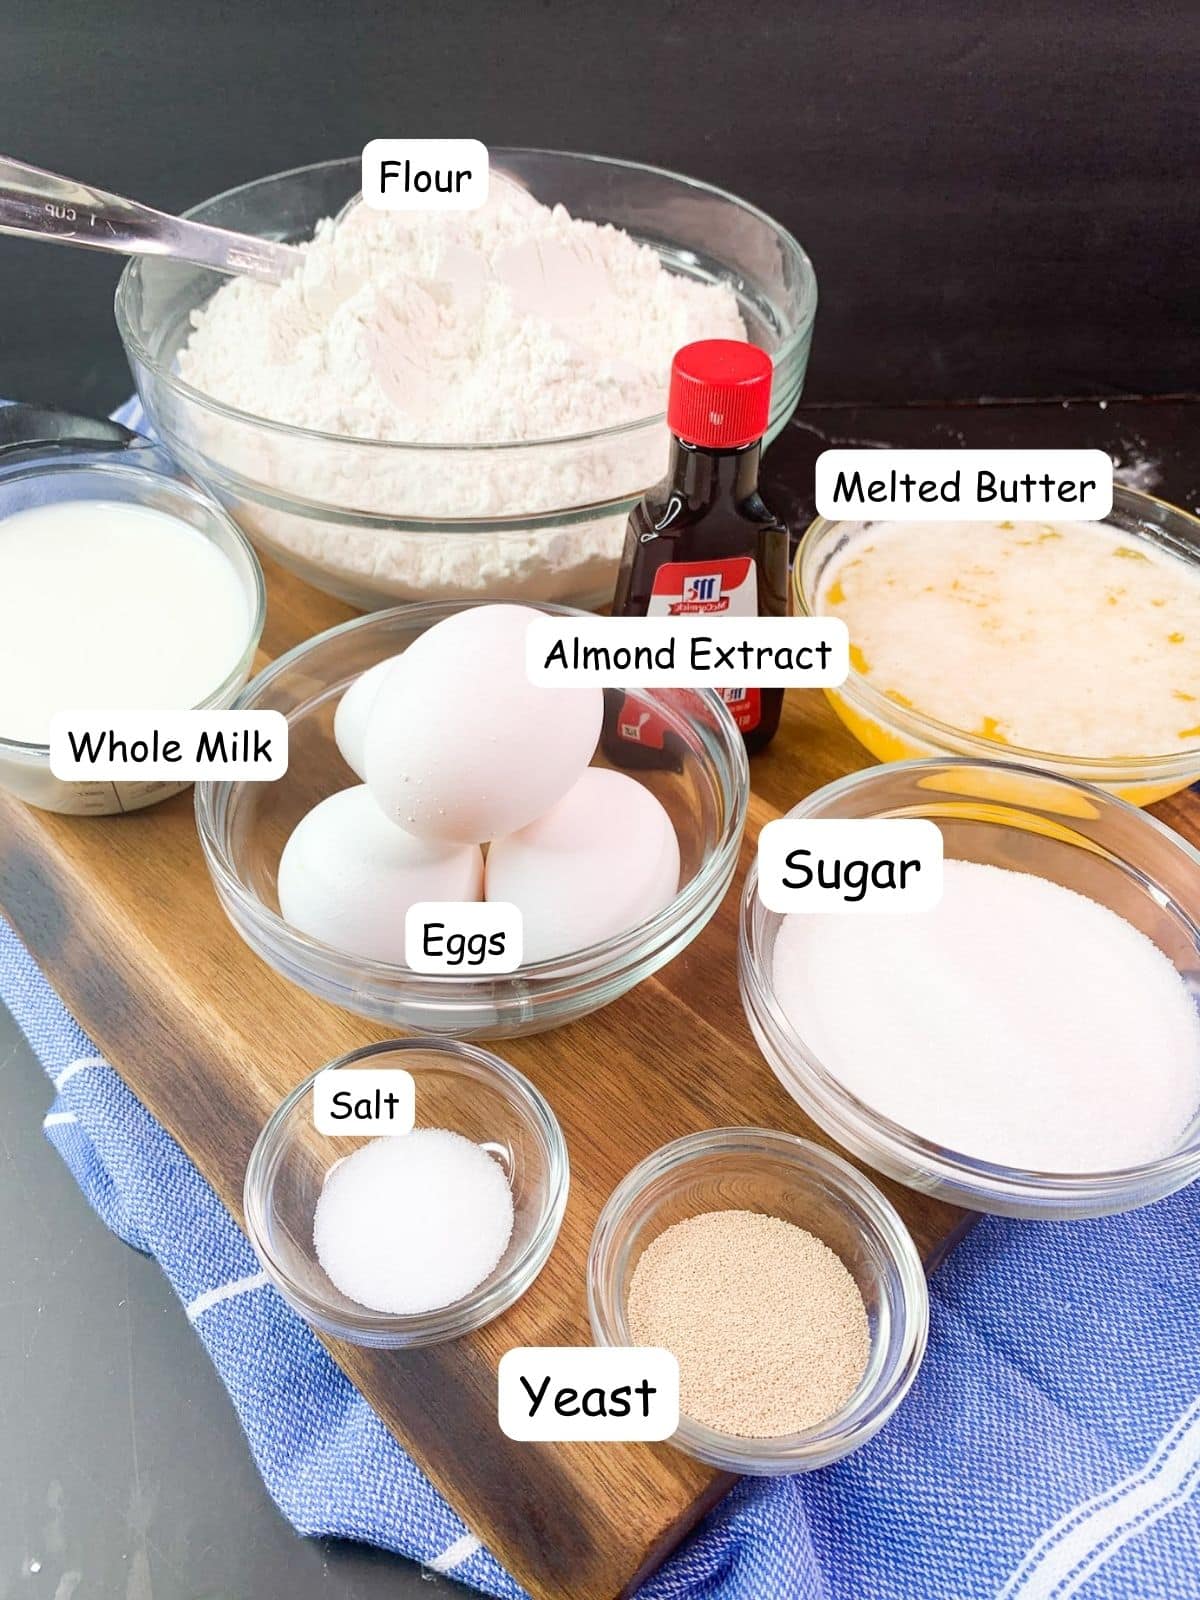 Ingredients for Easter bread dough.